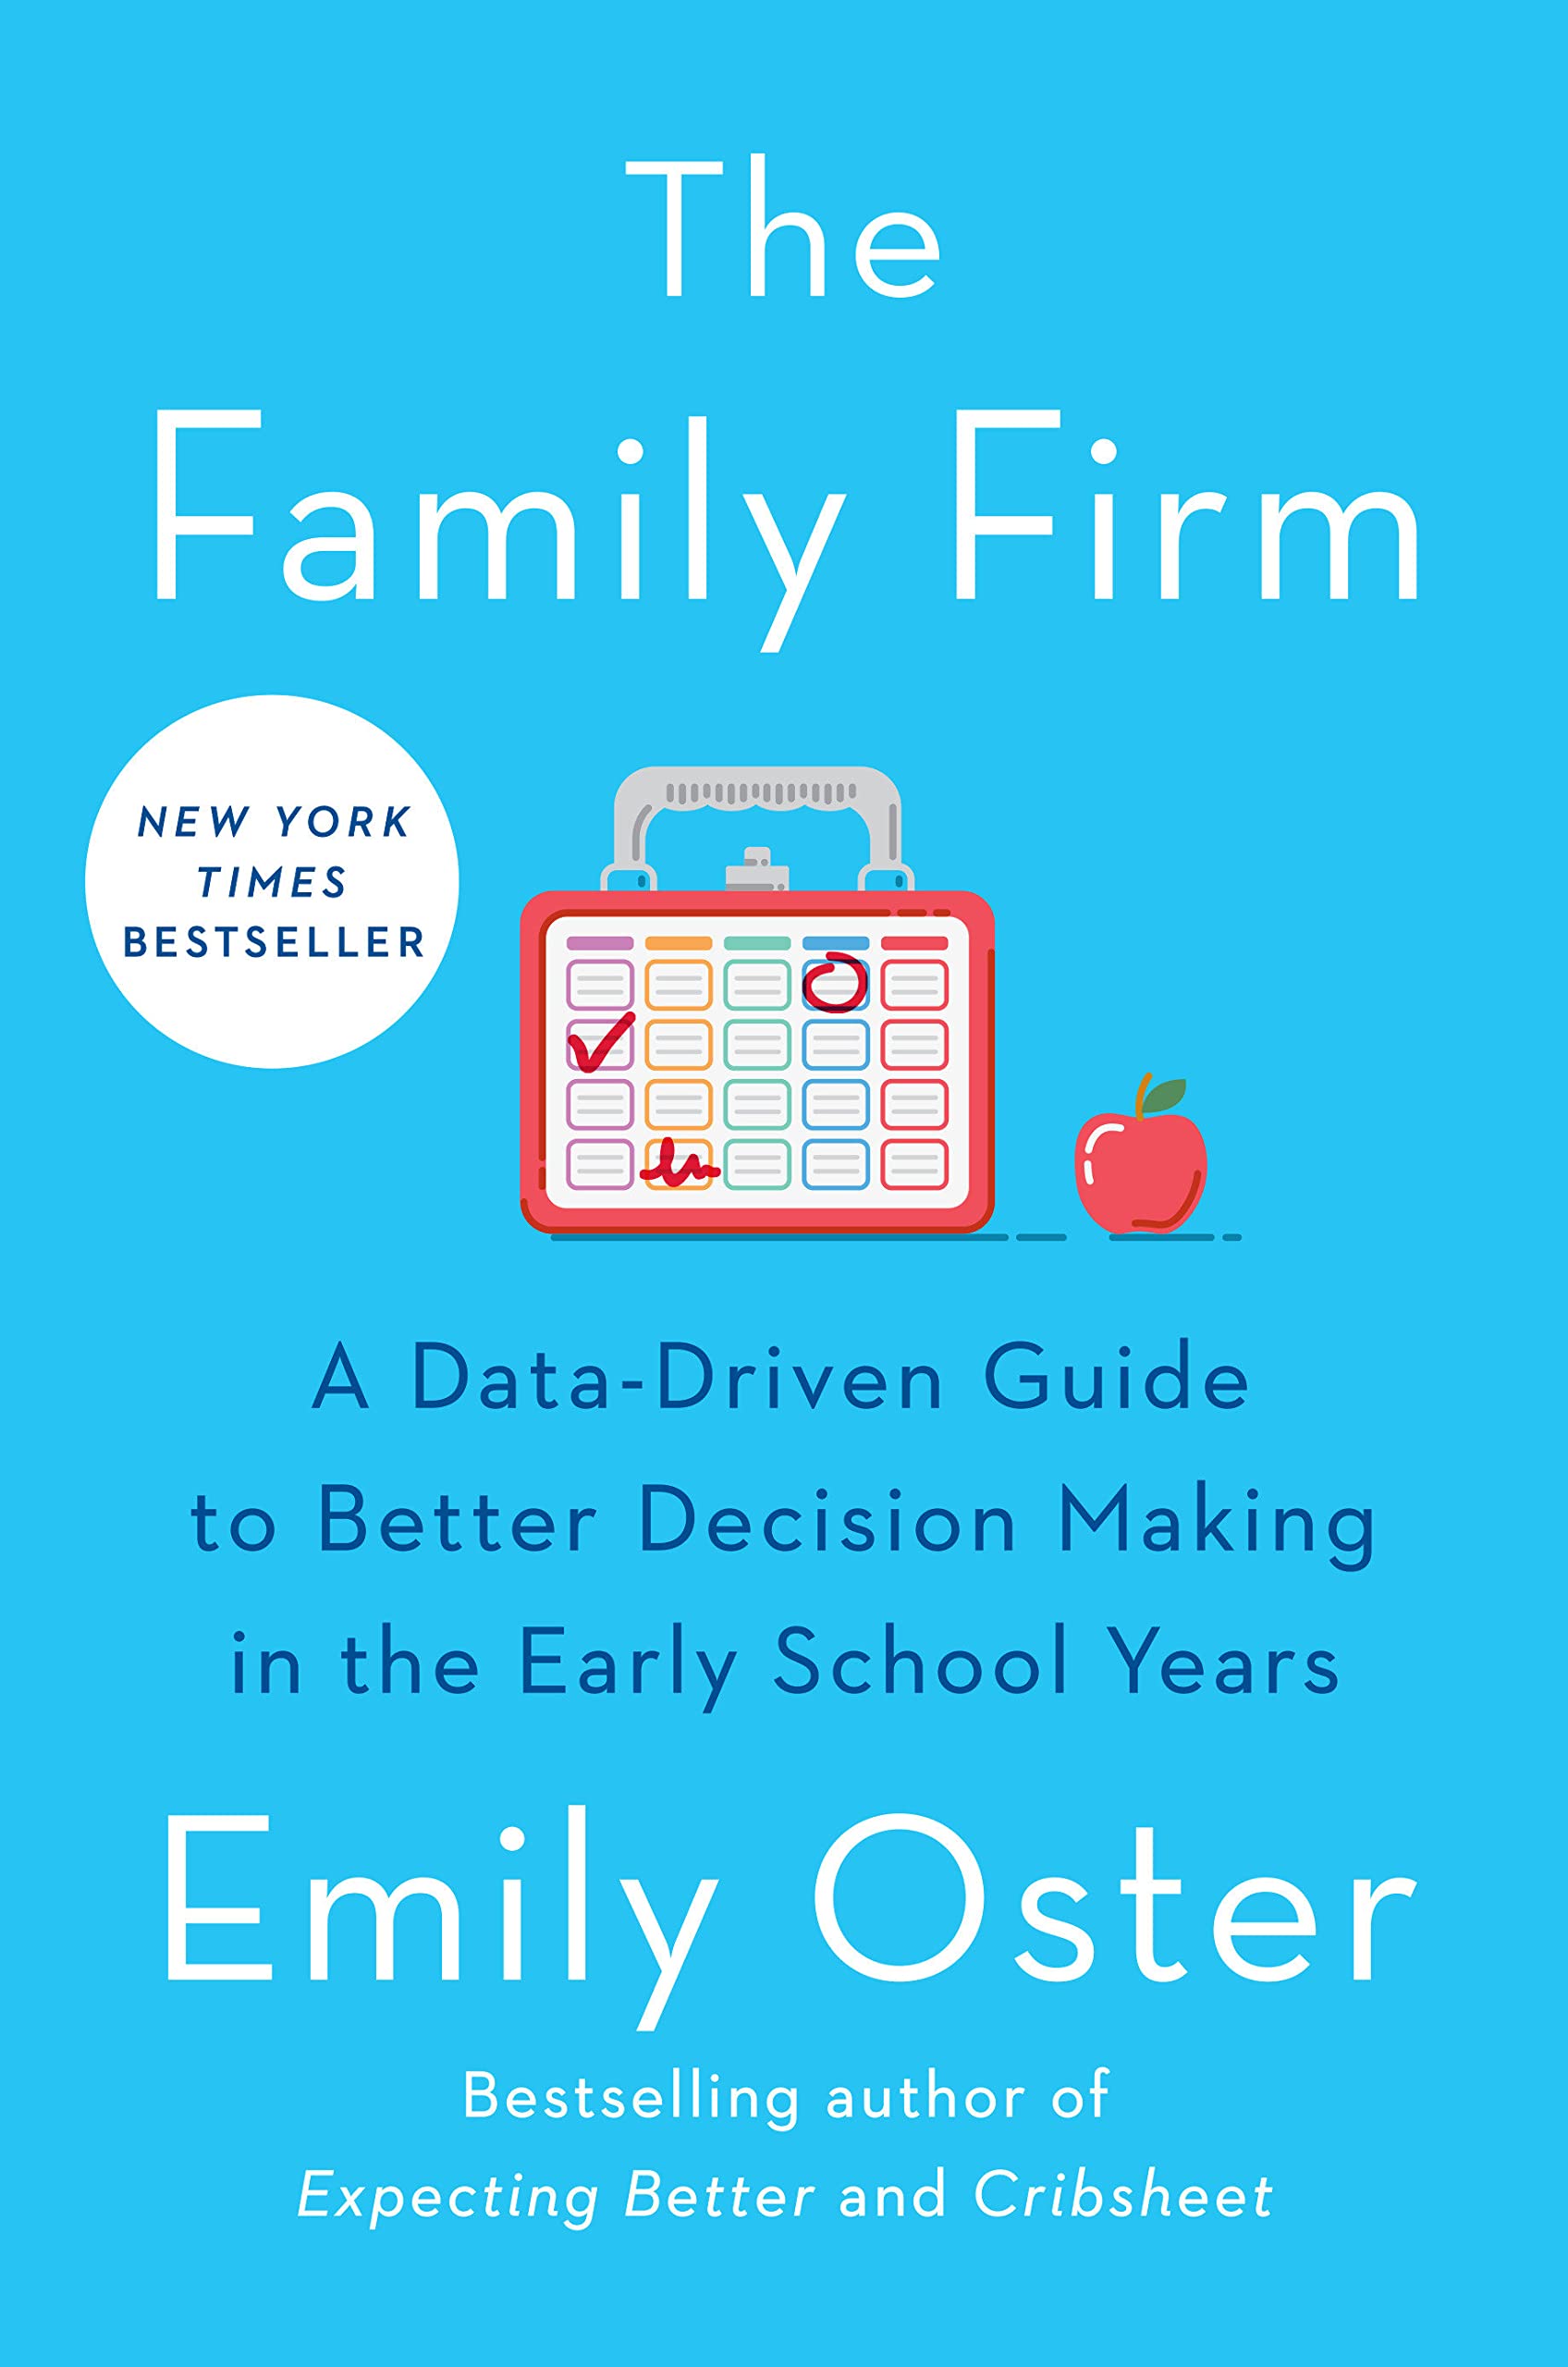 book cover the family firm by emily oster